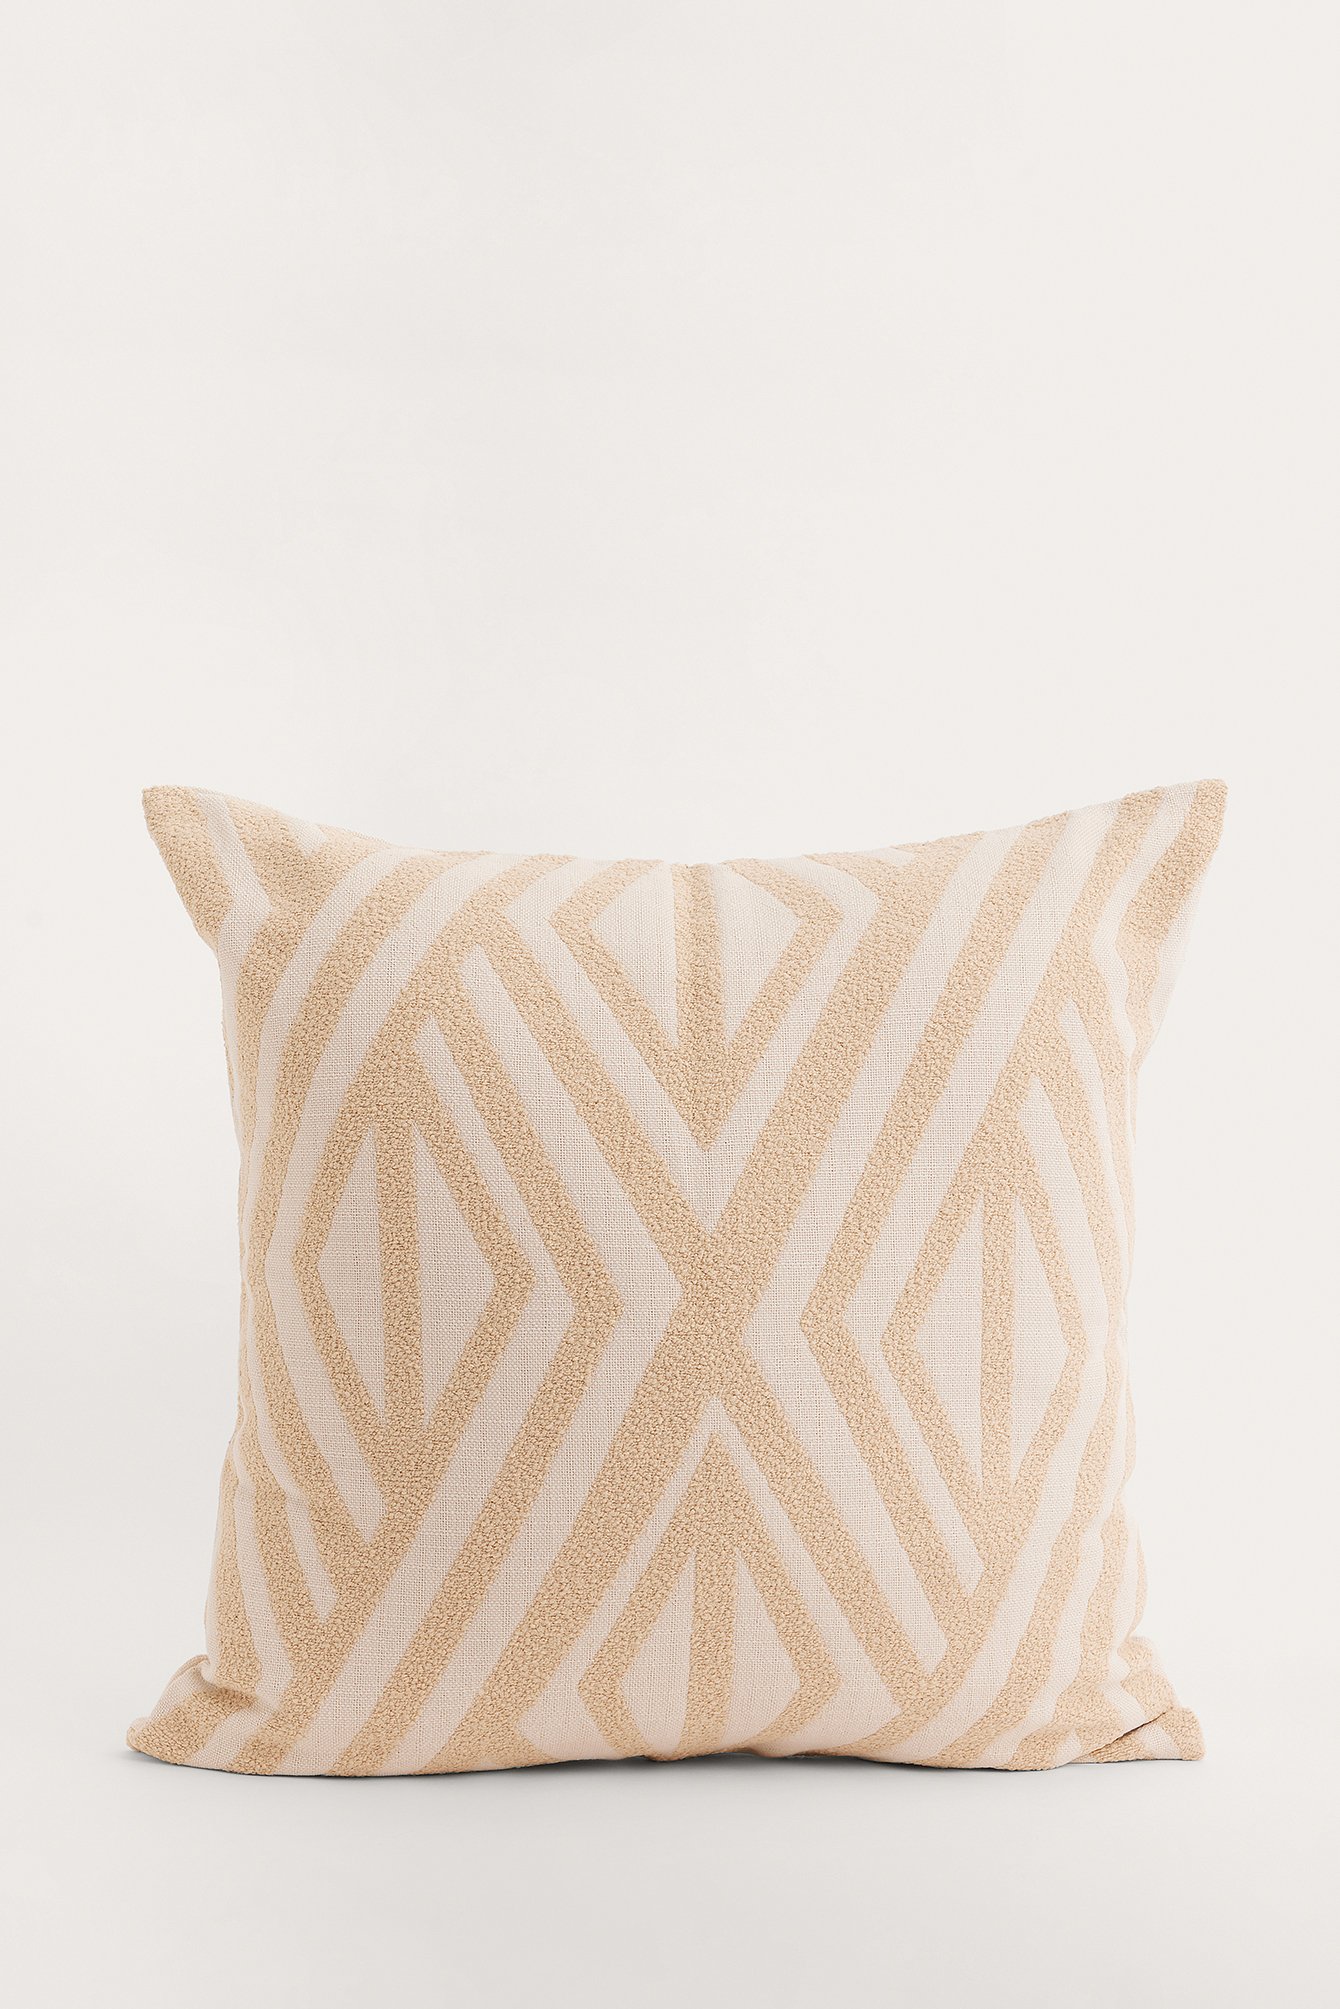 Light Beige Patterned Cushion Cover